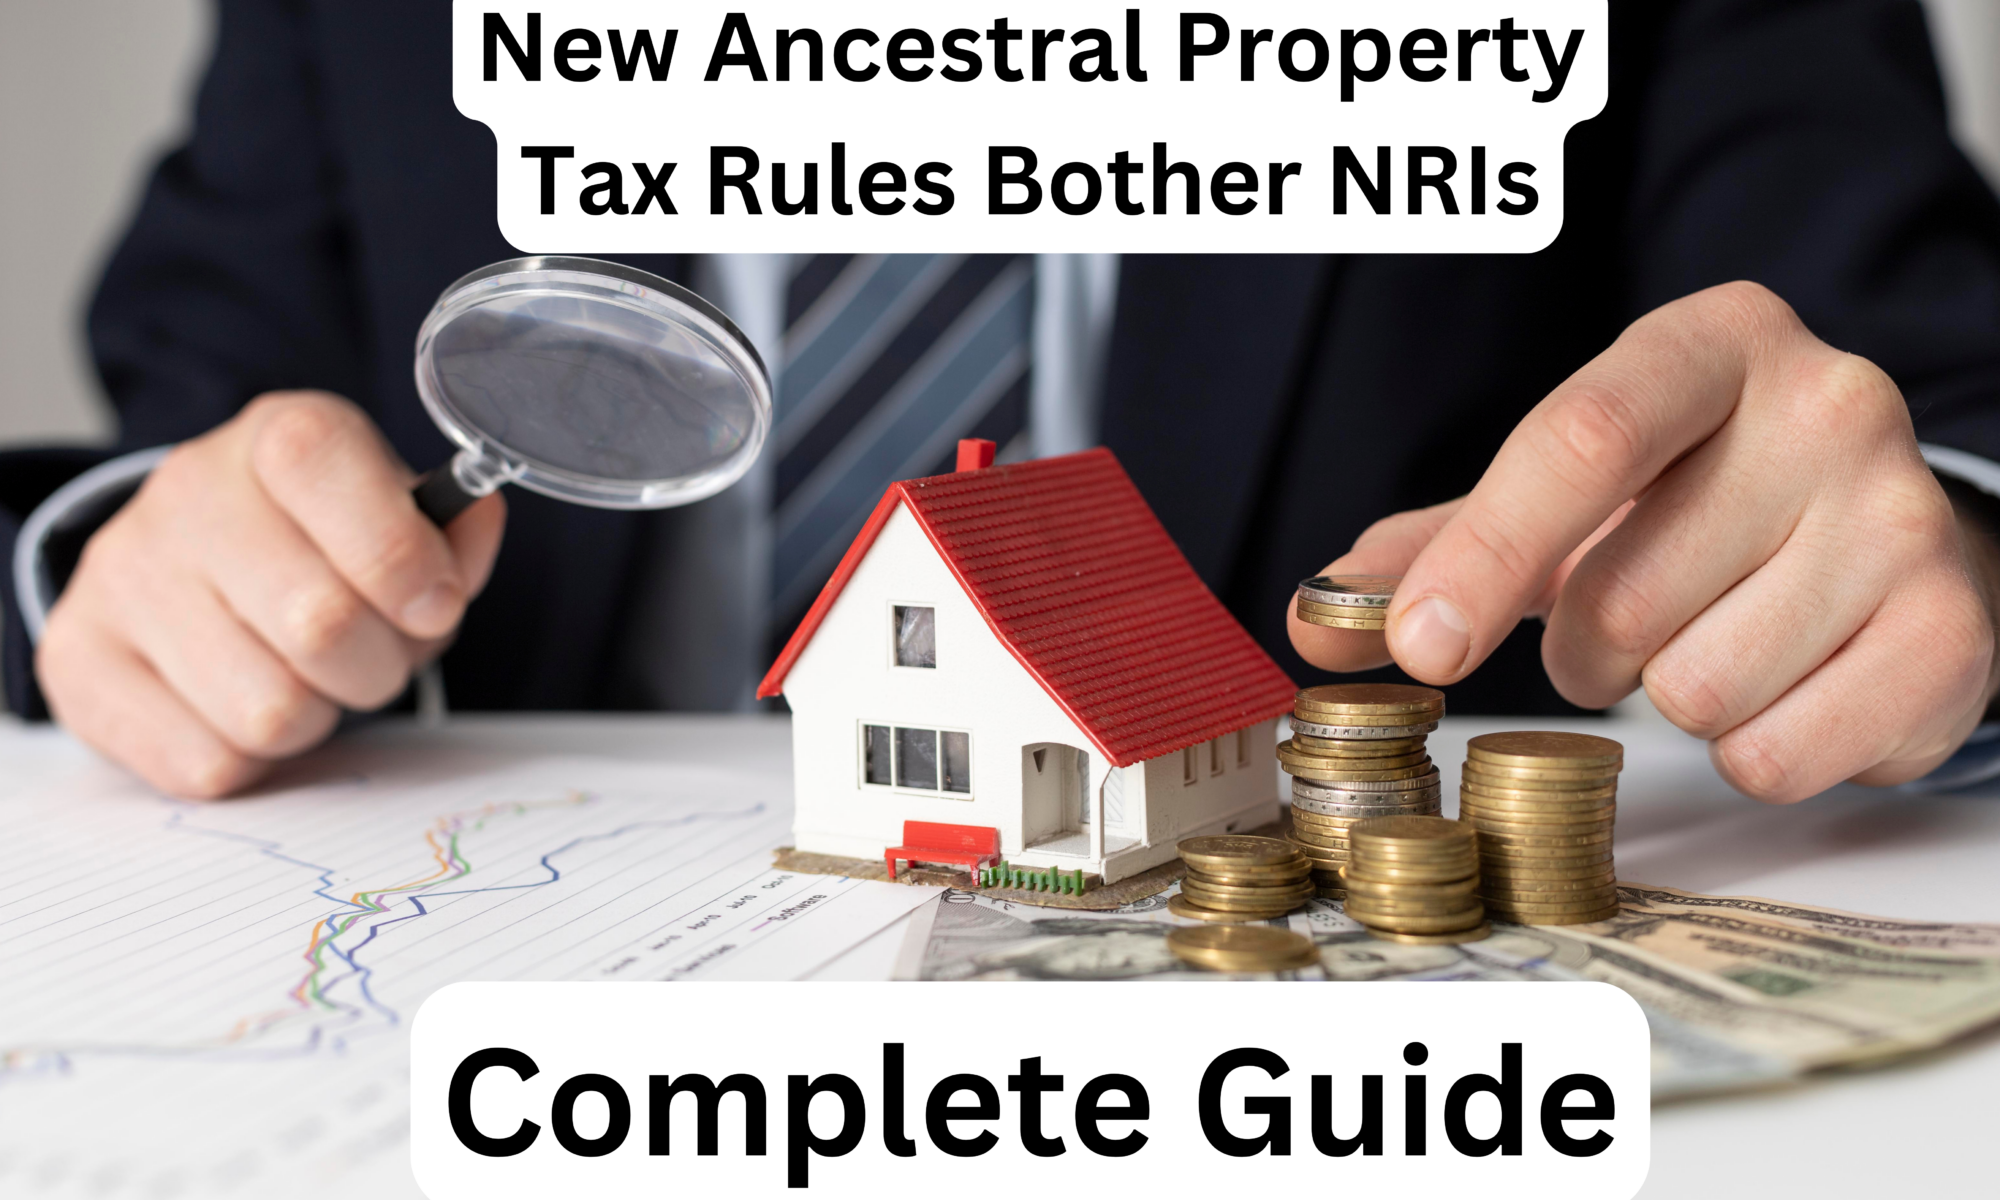 New Ancestral Property Tax Rules Bother NRIs